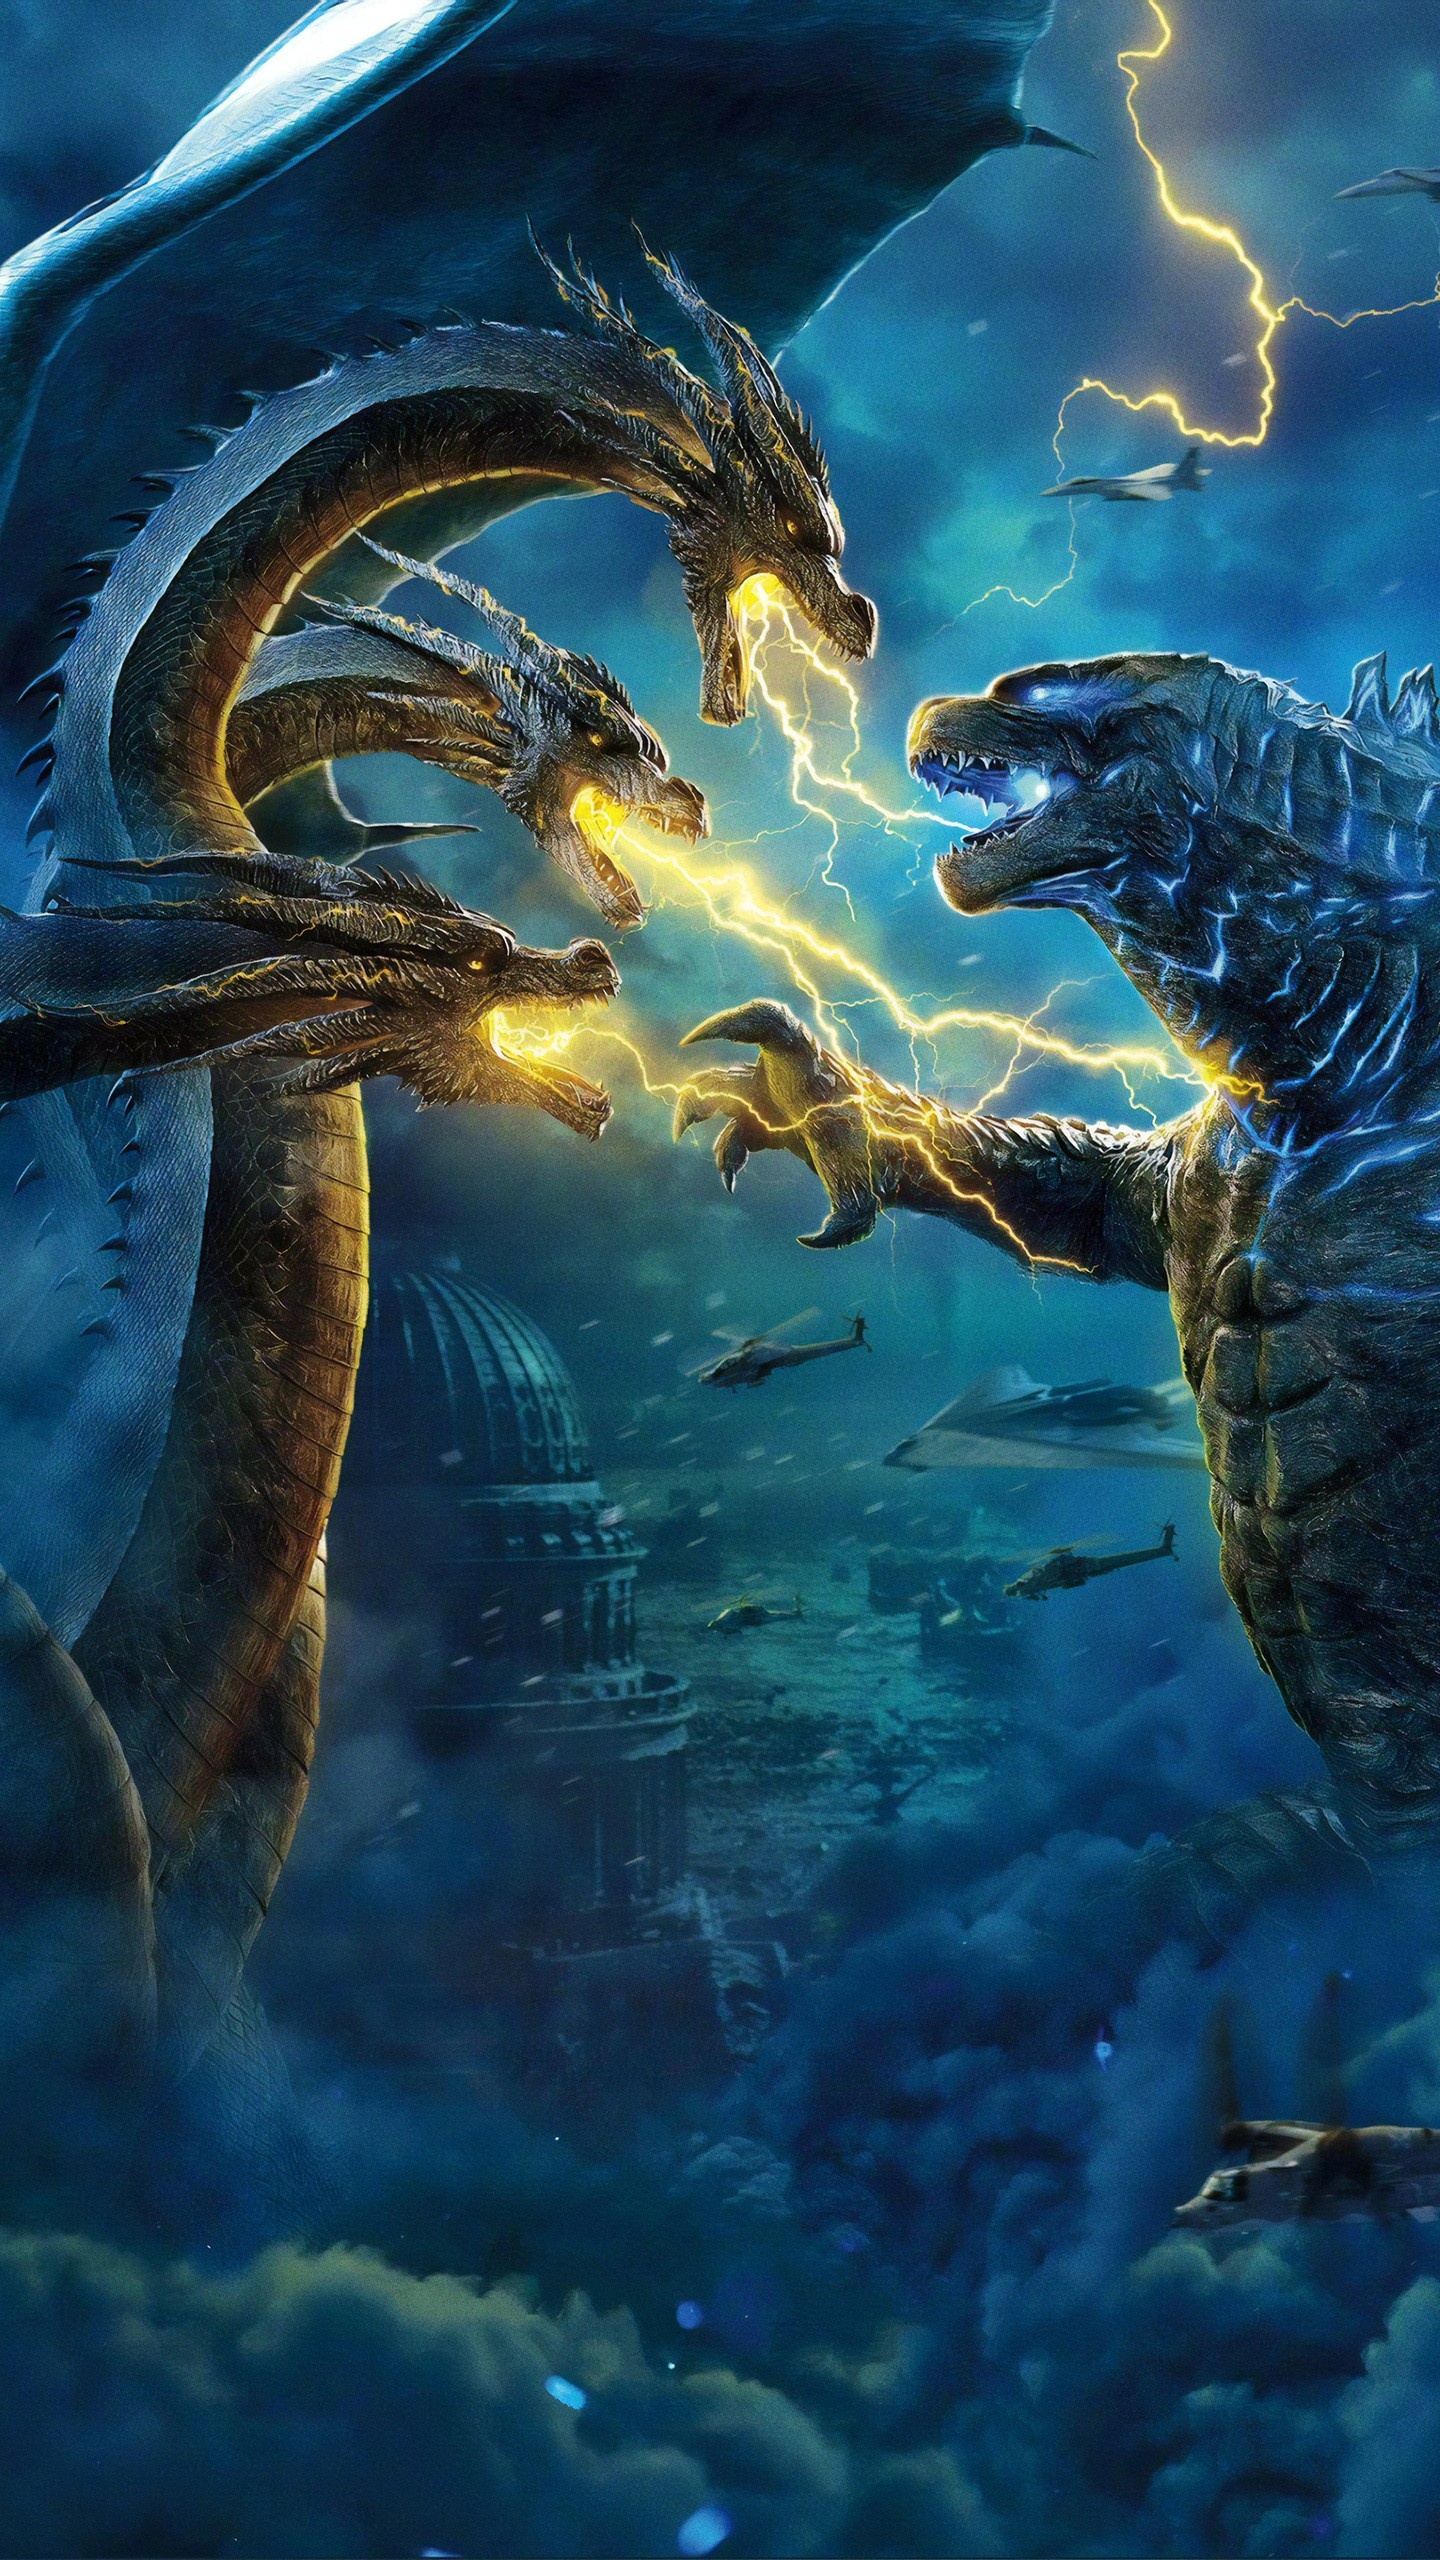 Godzilla: Defended Japan by fending off other more malevolent creatures such as King Ghidorah. 1440x2560 HD Wallpaper.